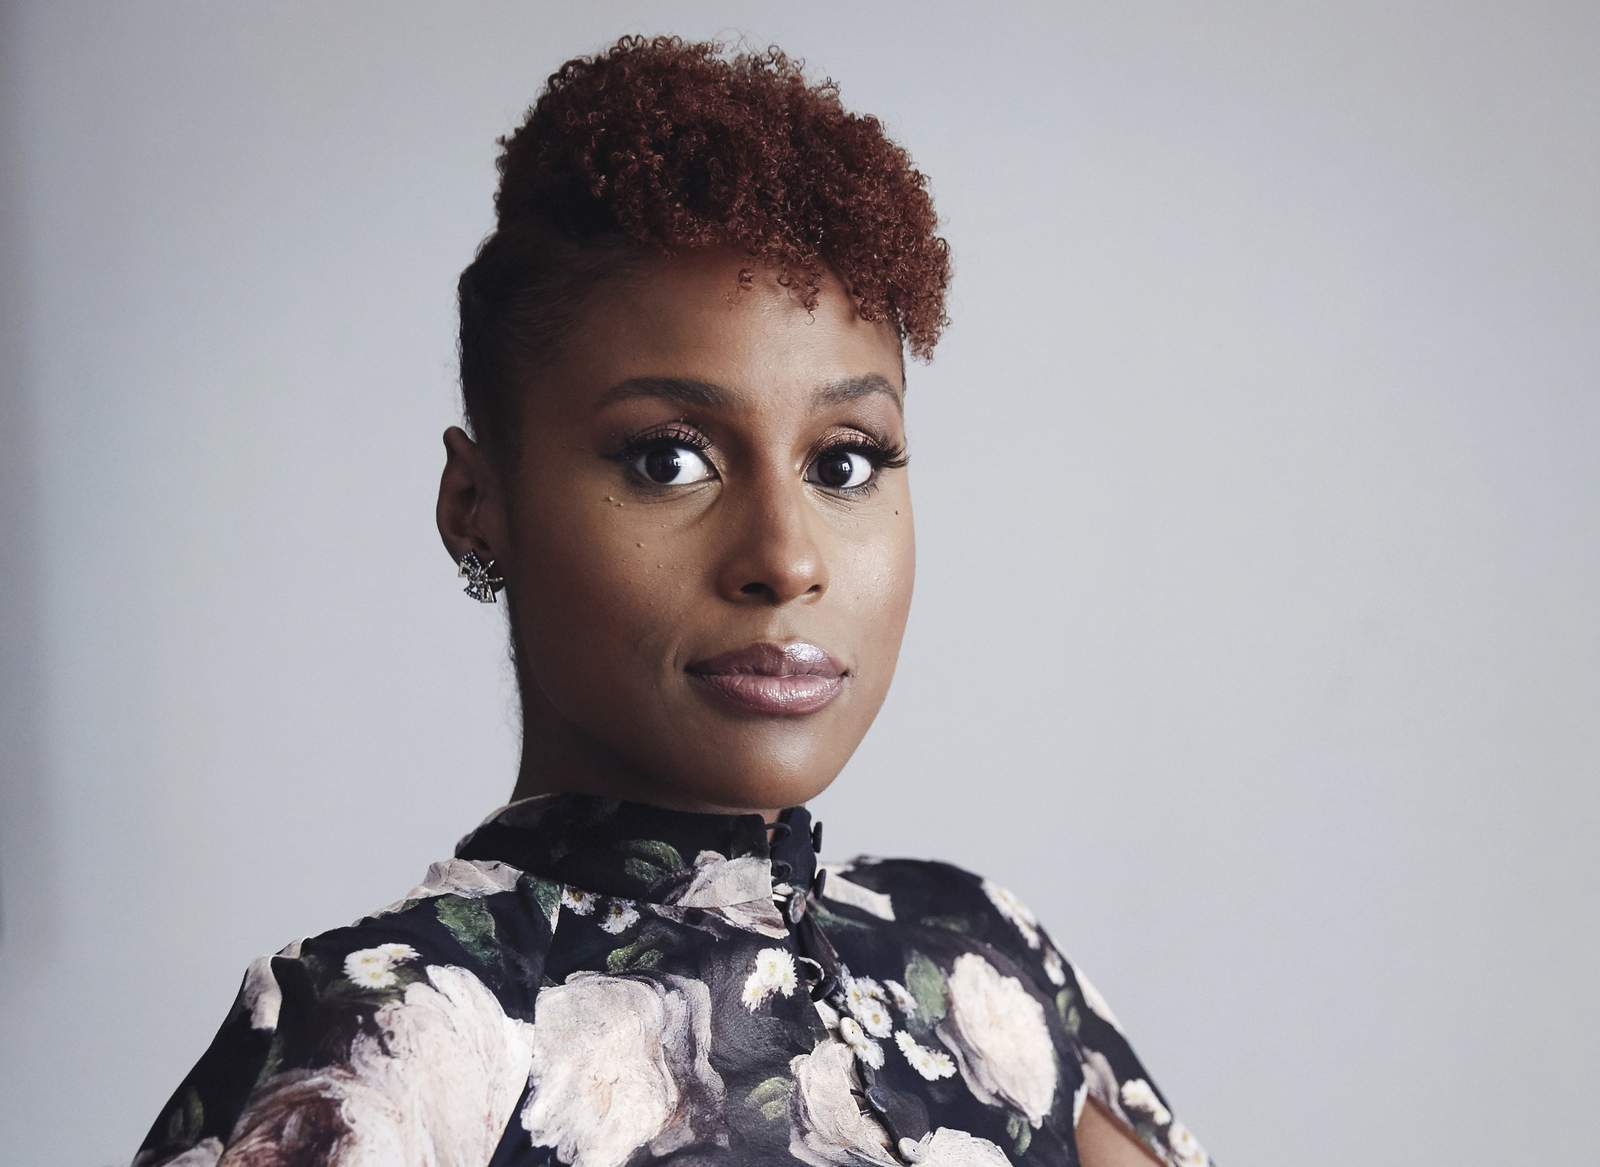 Issa Rae urges participation in Small Business Saturday